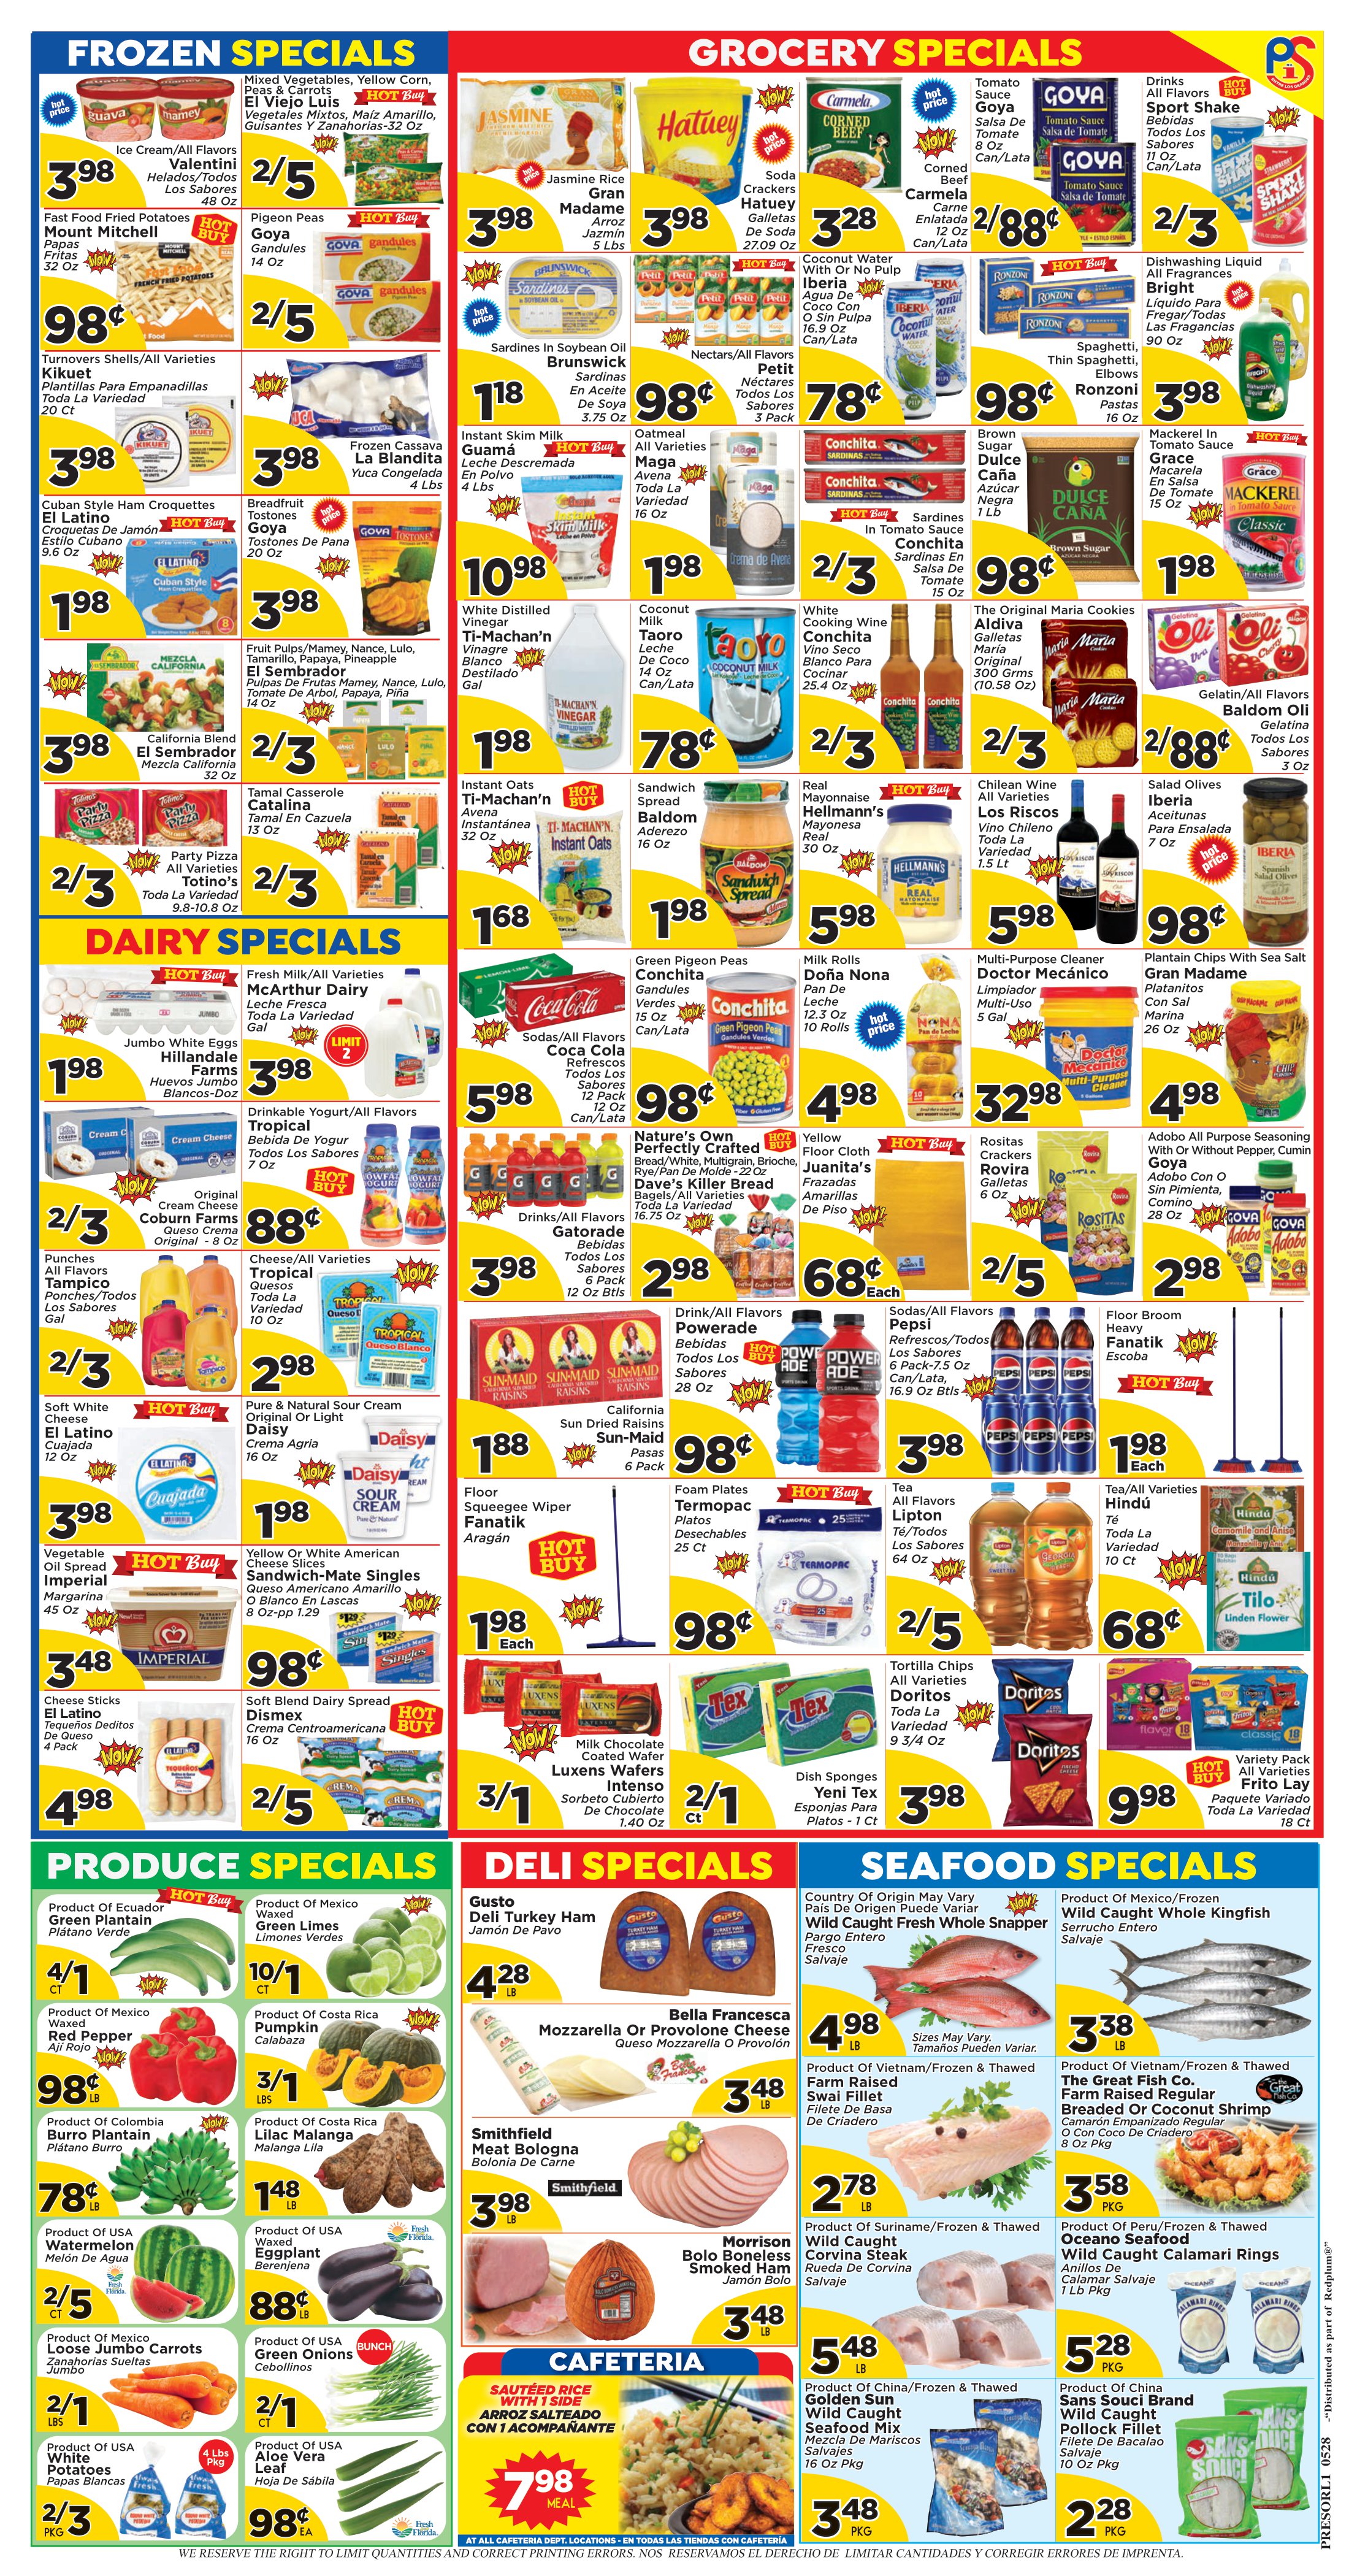 Presidente Supermarket - Weekly Promo for Store 47, 49, 50 and 57 - Page 2